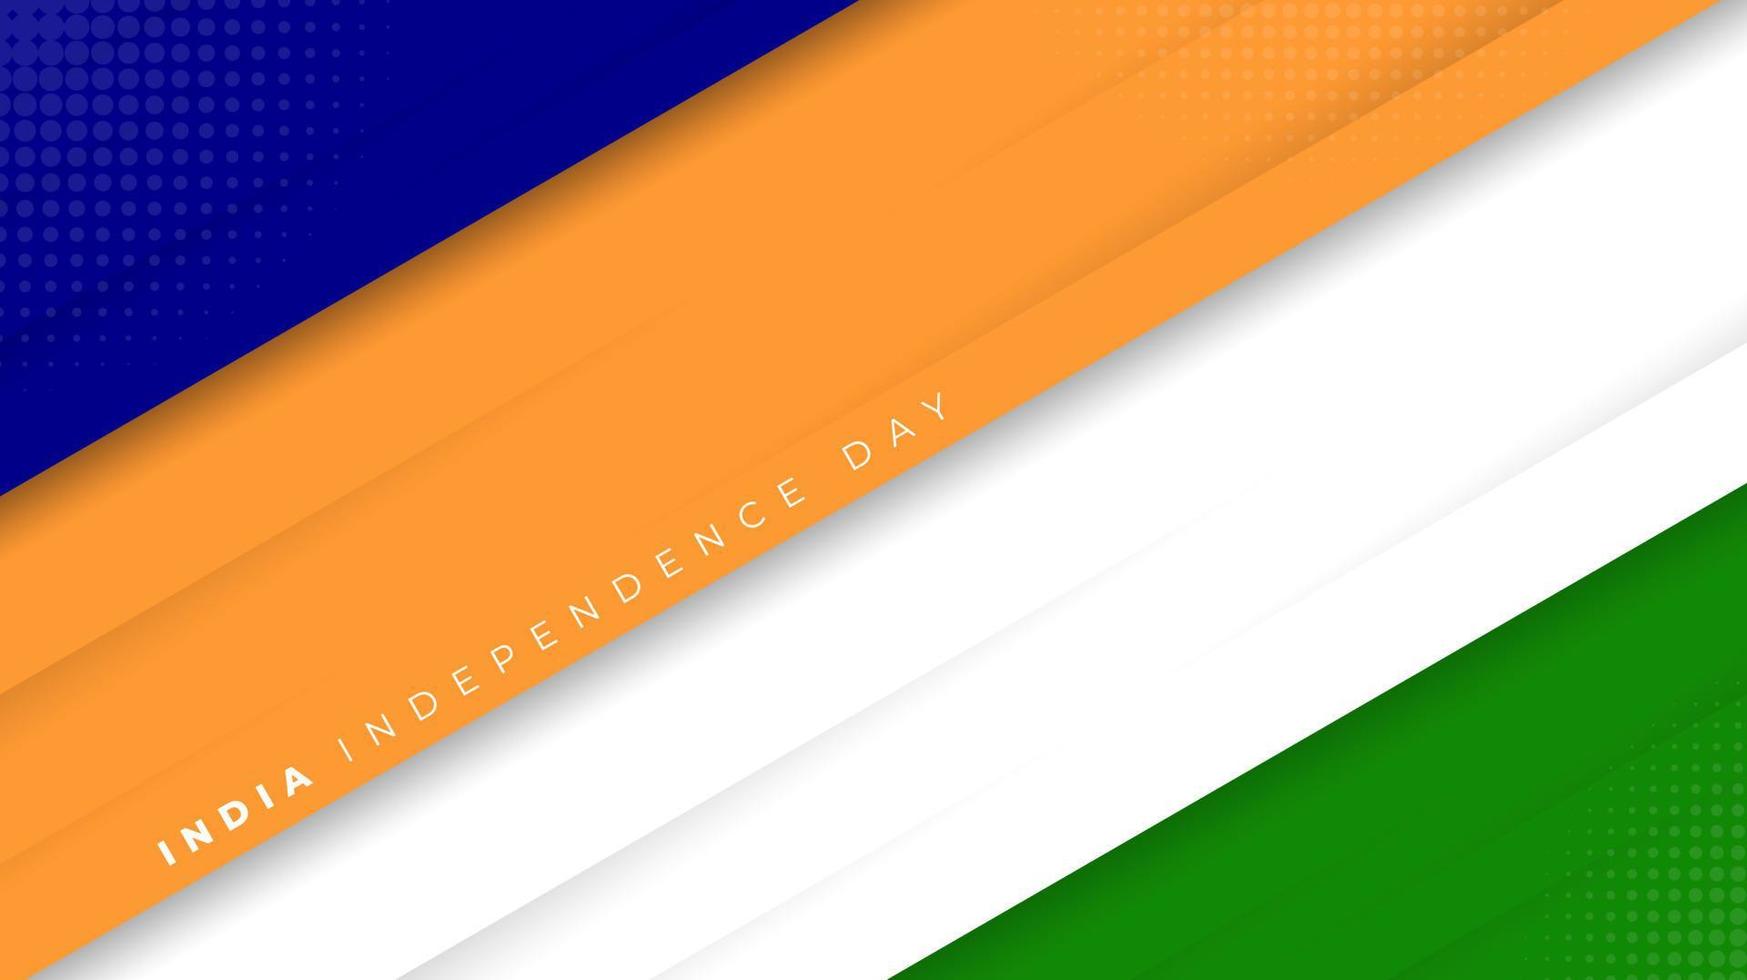 Abstract background with green white orange and blue color for india independence day design vector